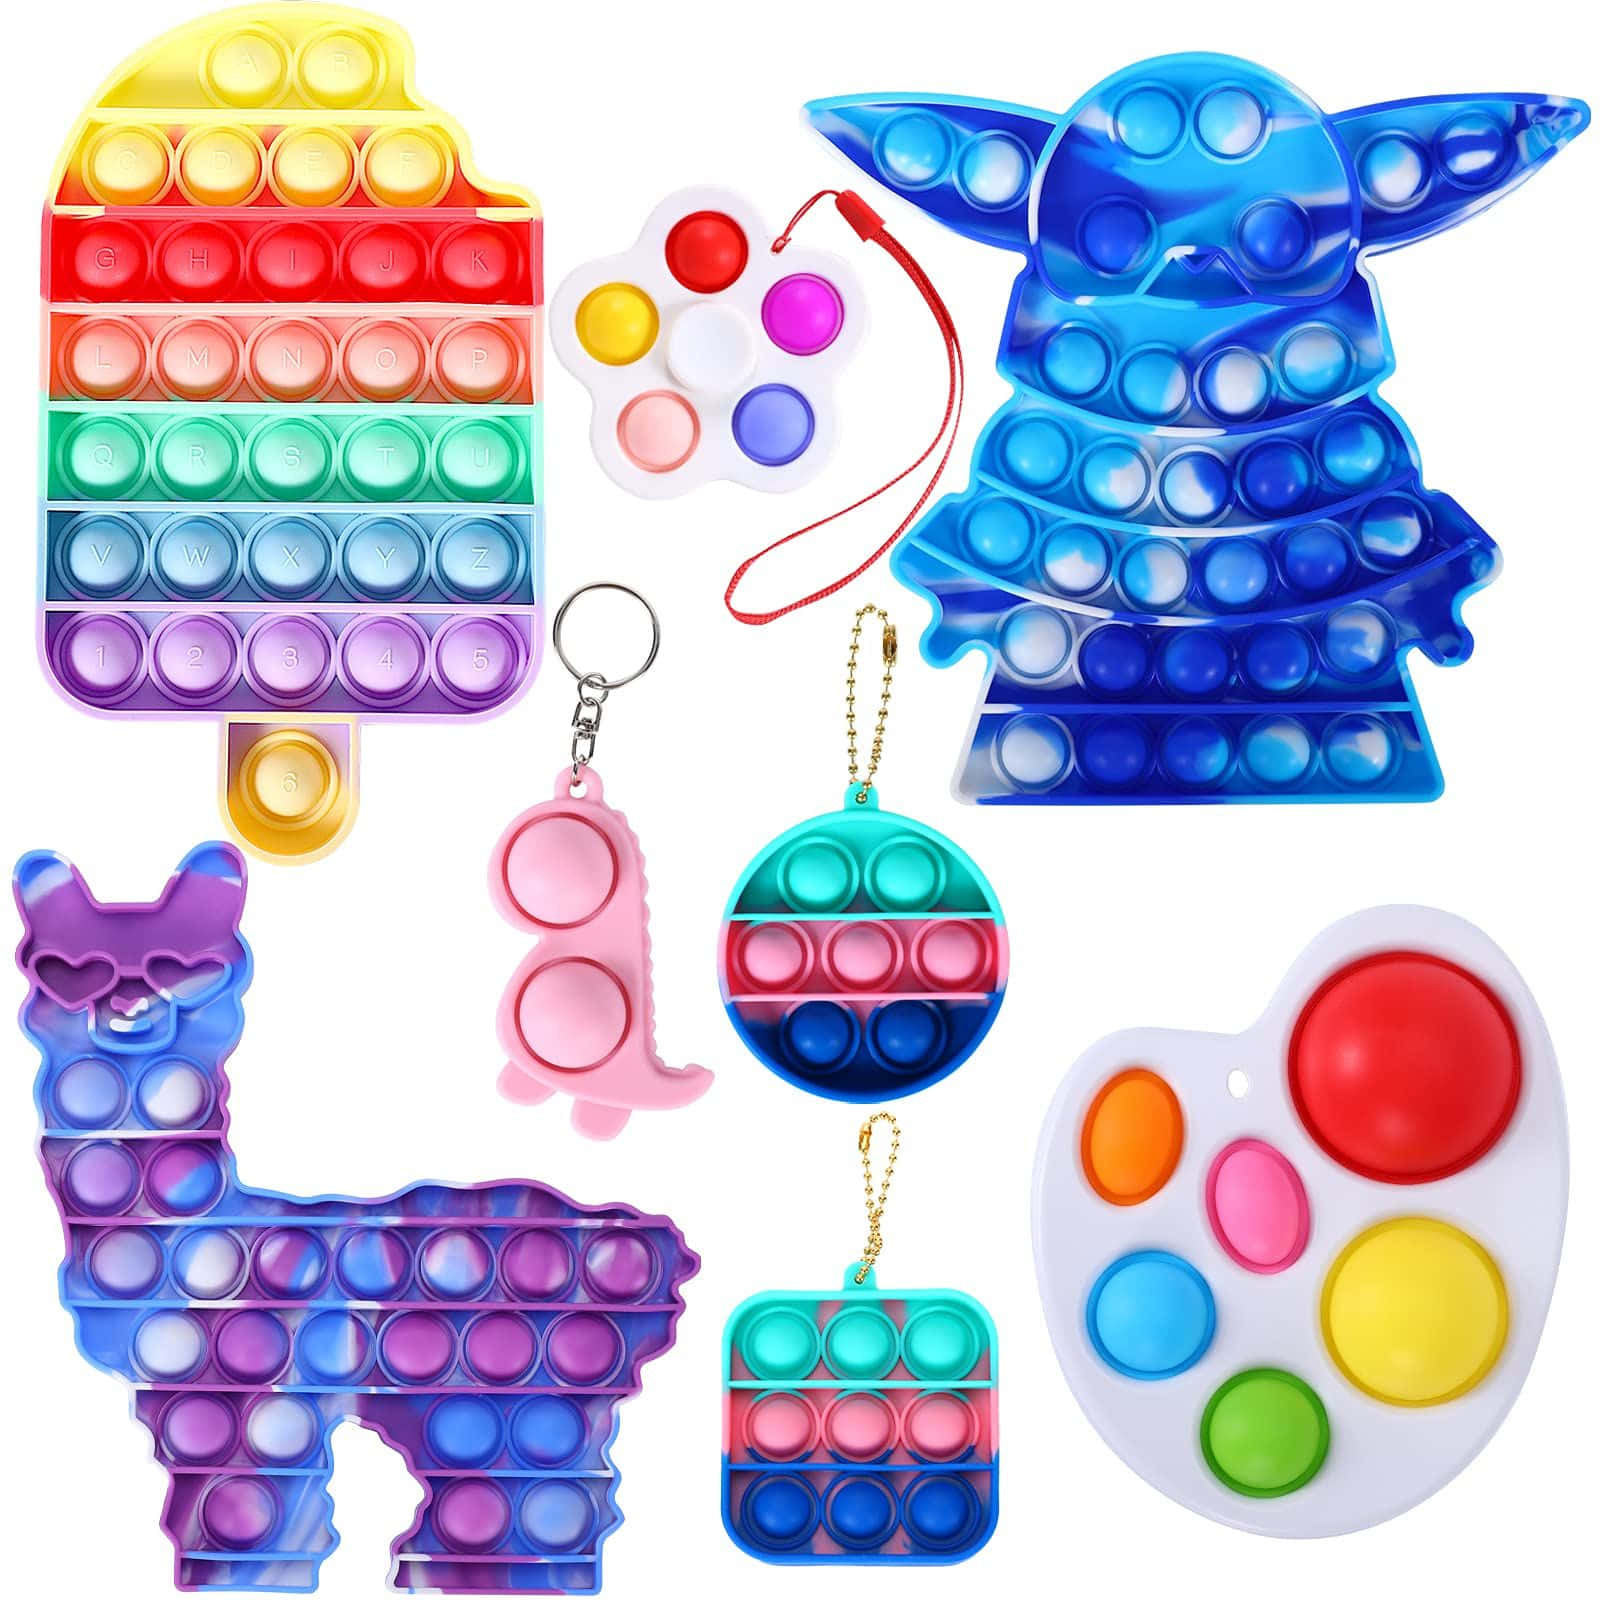 Colorful Popit Fidget Sensory Toy Exploding with Fun